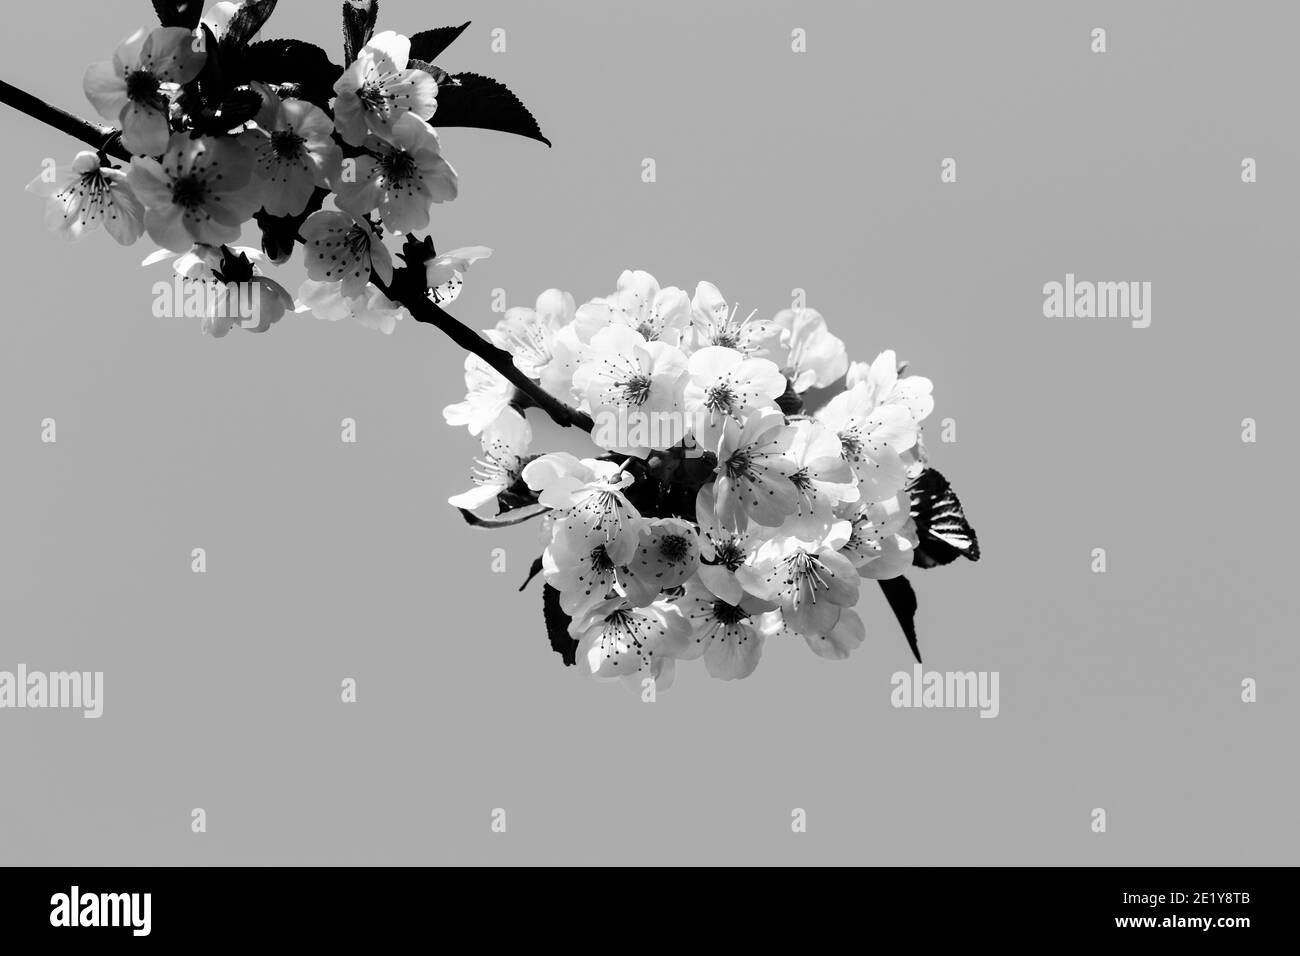 Sunlit blooming branches of fruit tree on sunny day and clear gray background. Flowering plant in the rose family Rosaceae, genus Prunus. Wild cherry. Stock Photo